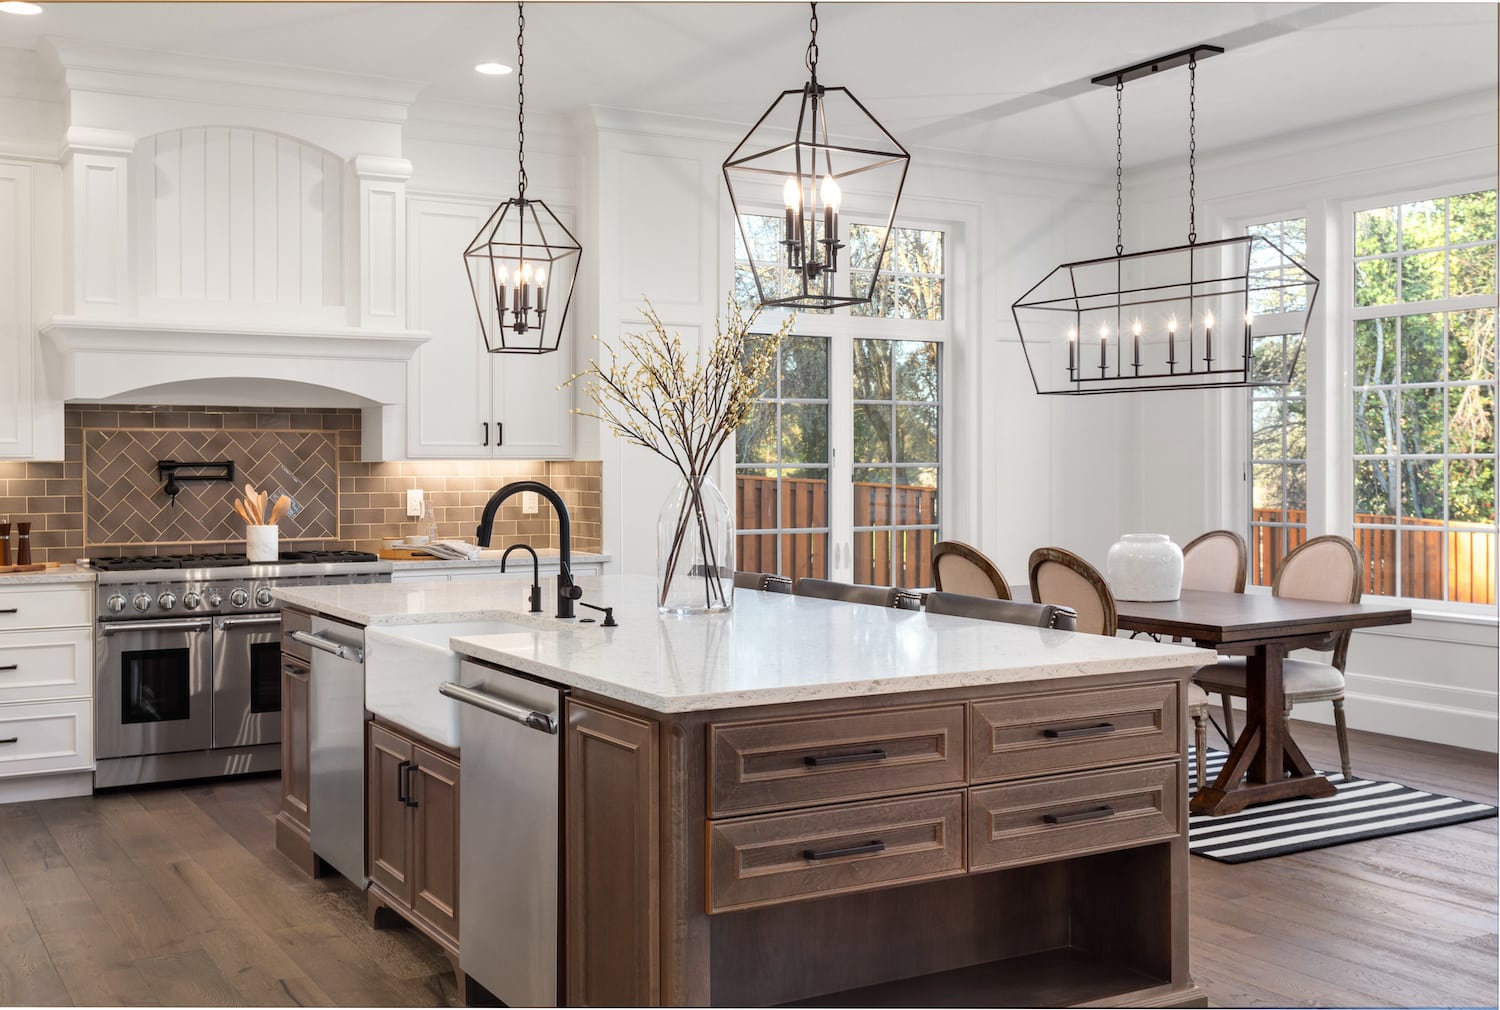 A urbandale kitchen with white cabinets and a center island.